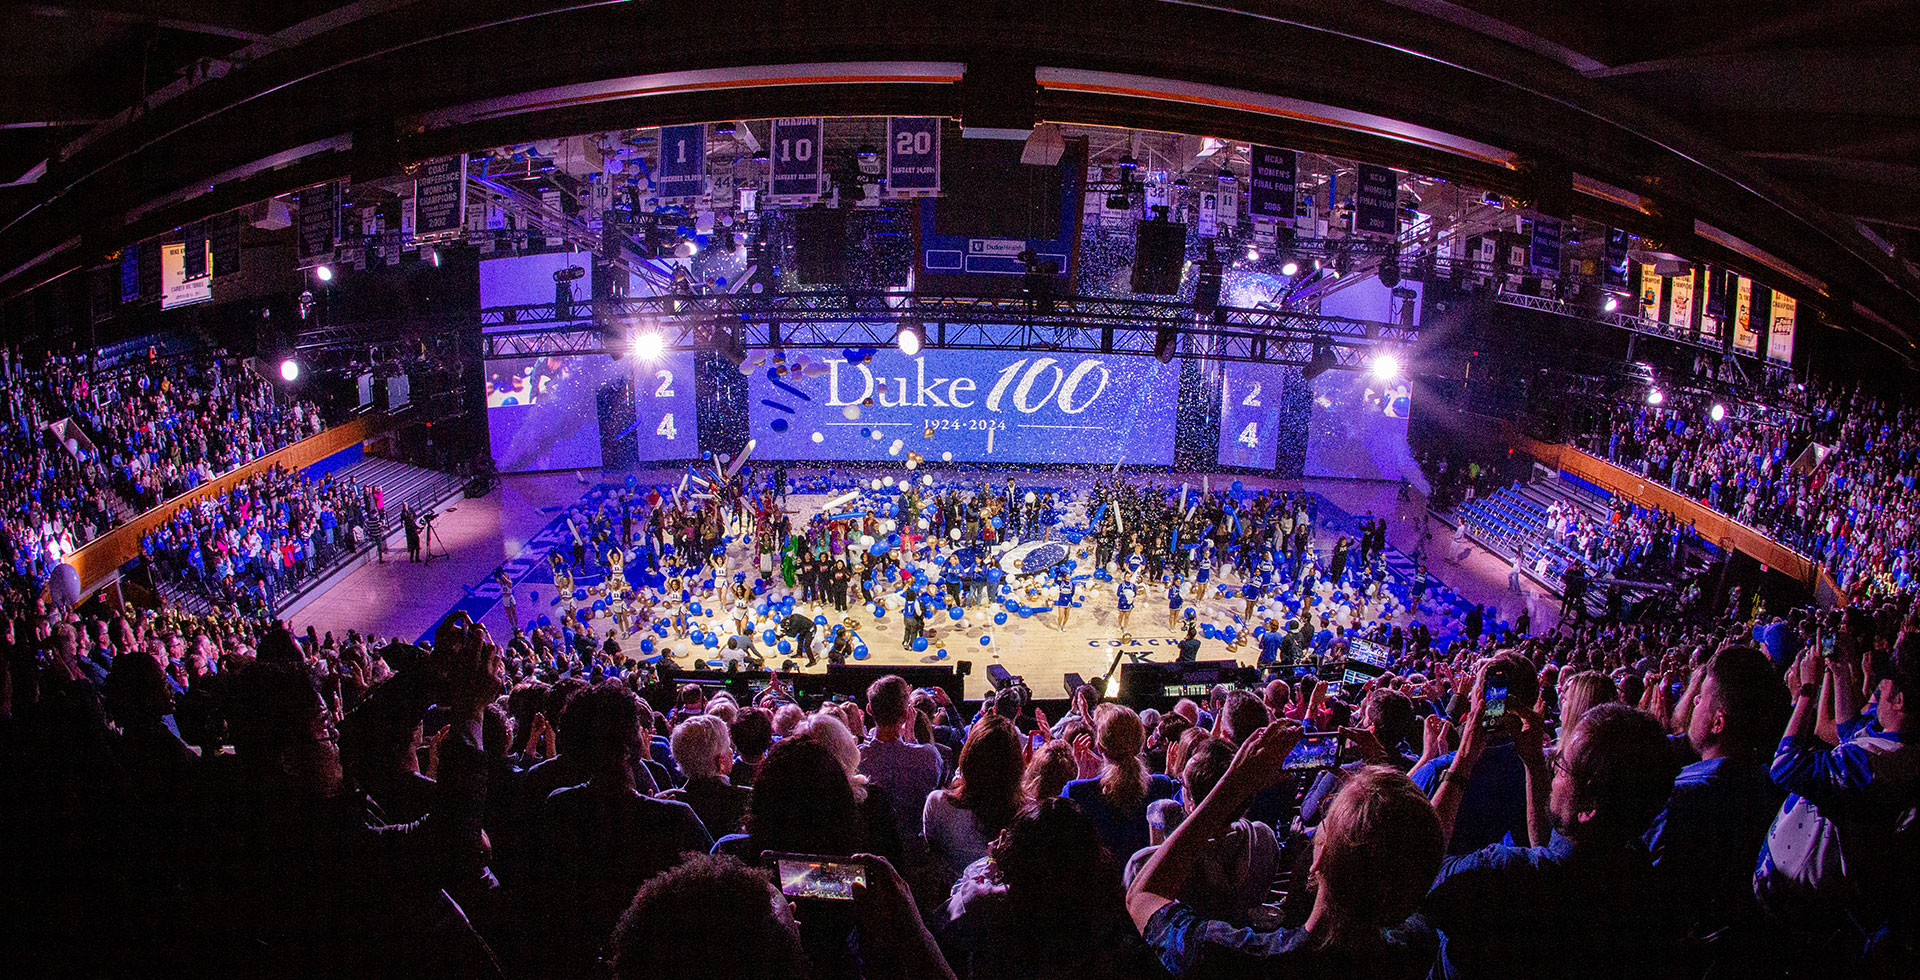 Every is on their feet in the stands as confetti rains down on the floor of Cameron Indoor Stadium